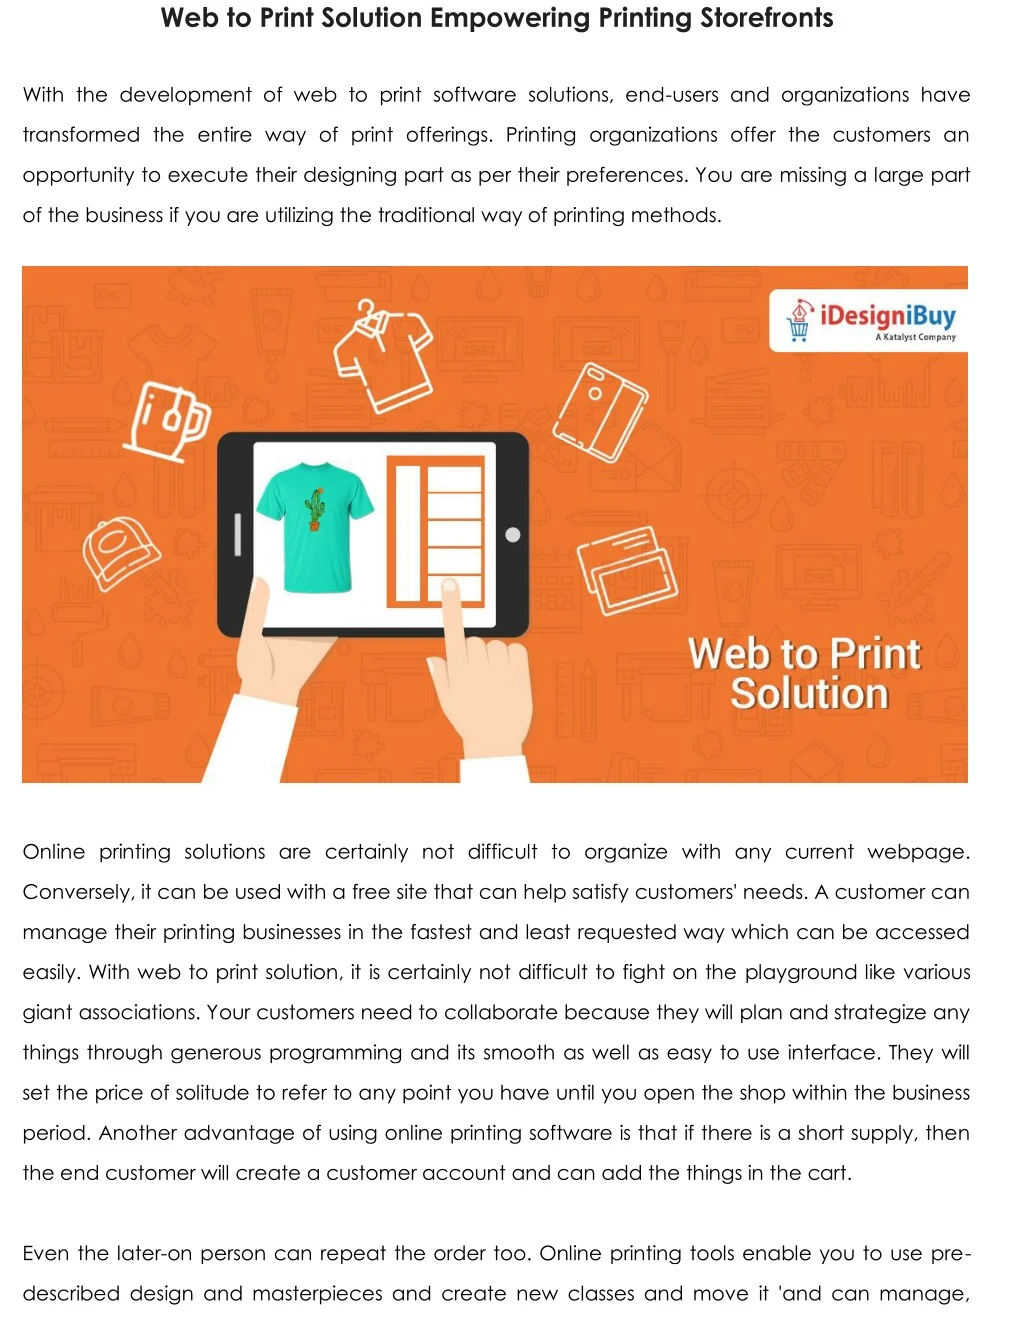 web to print solution empowering printing